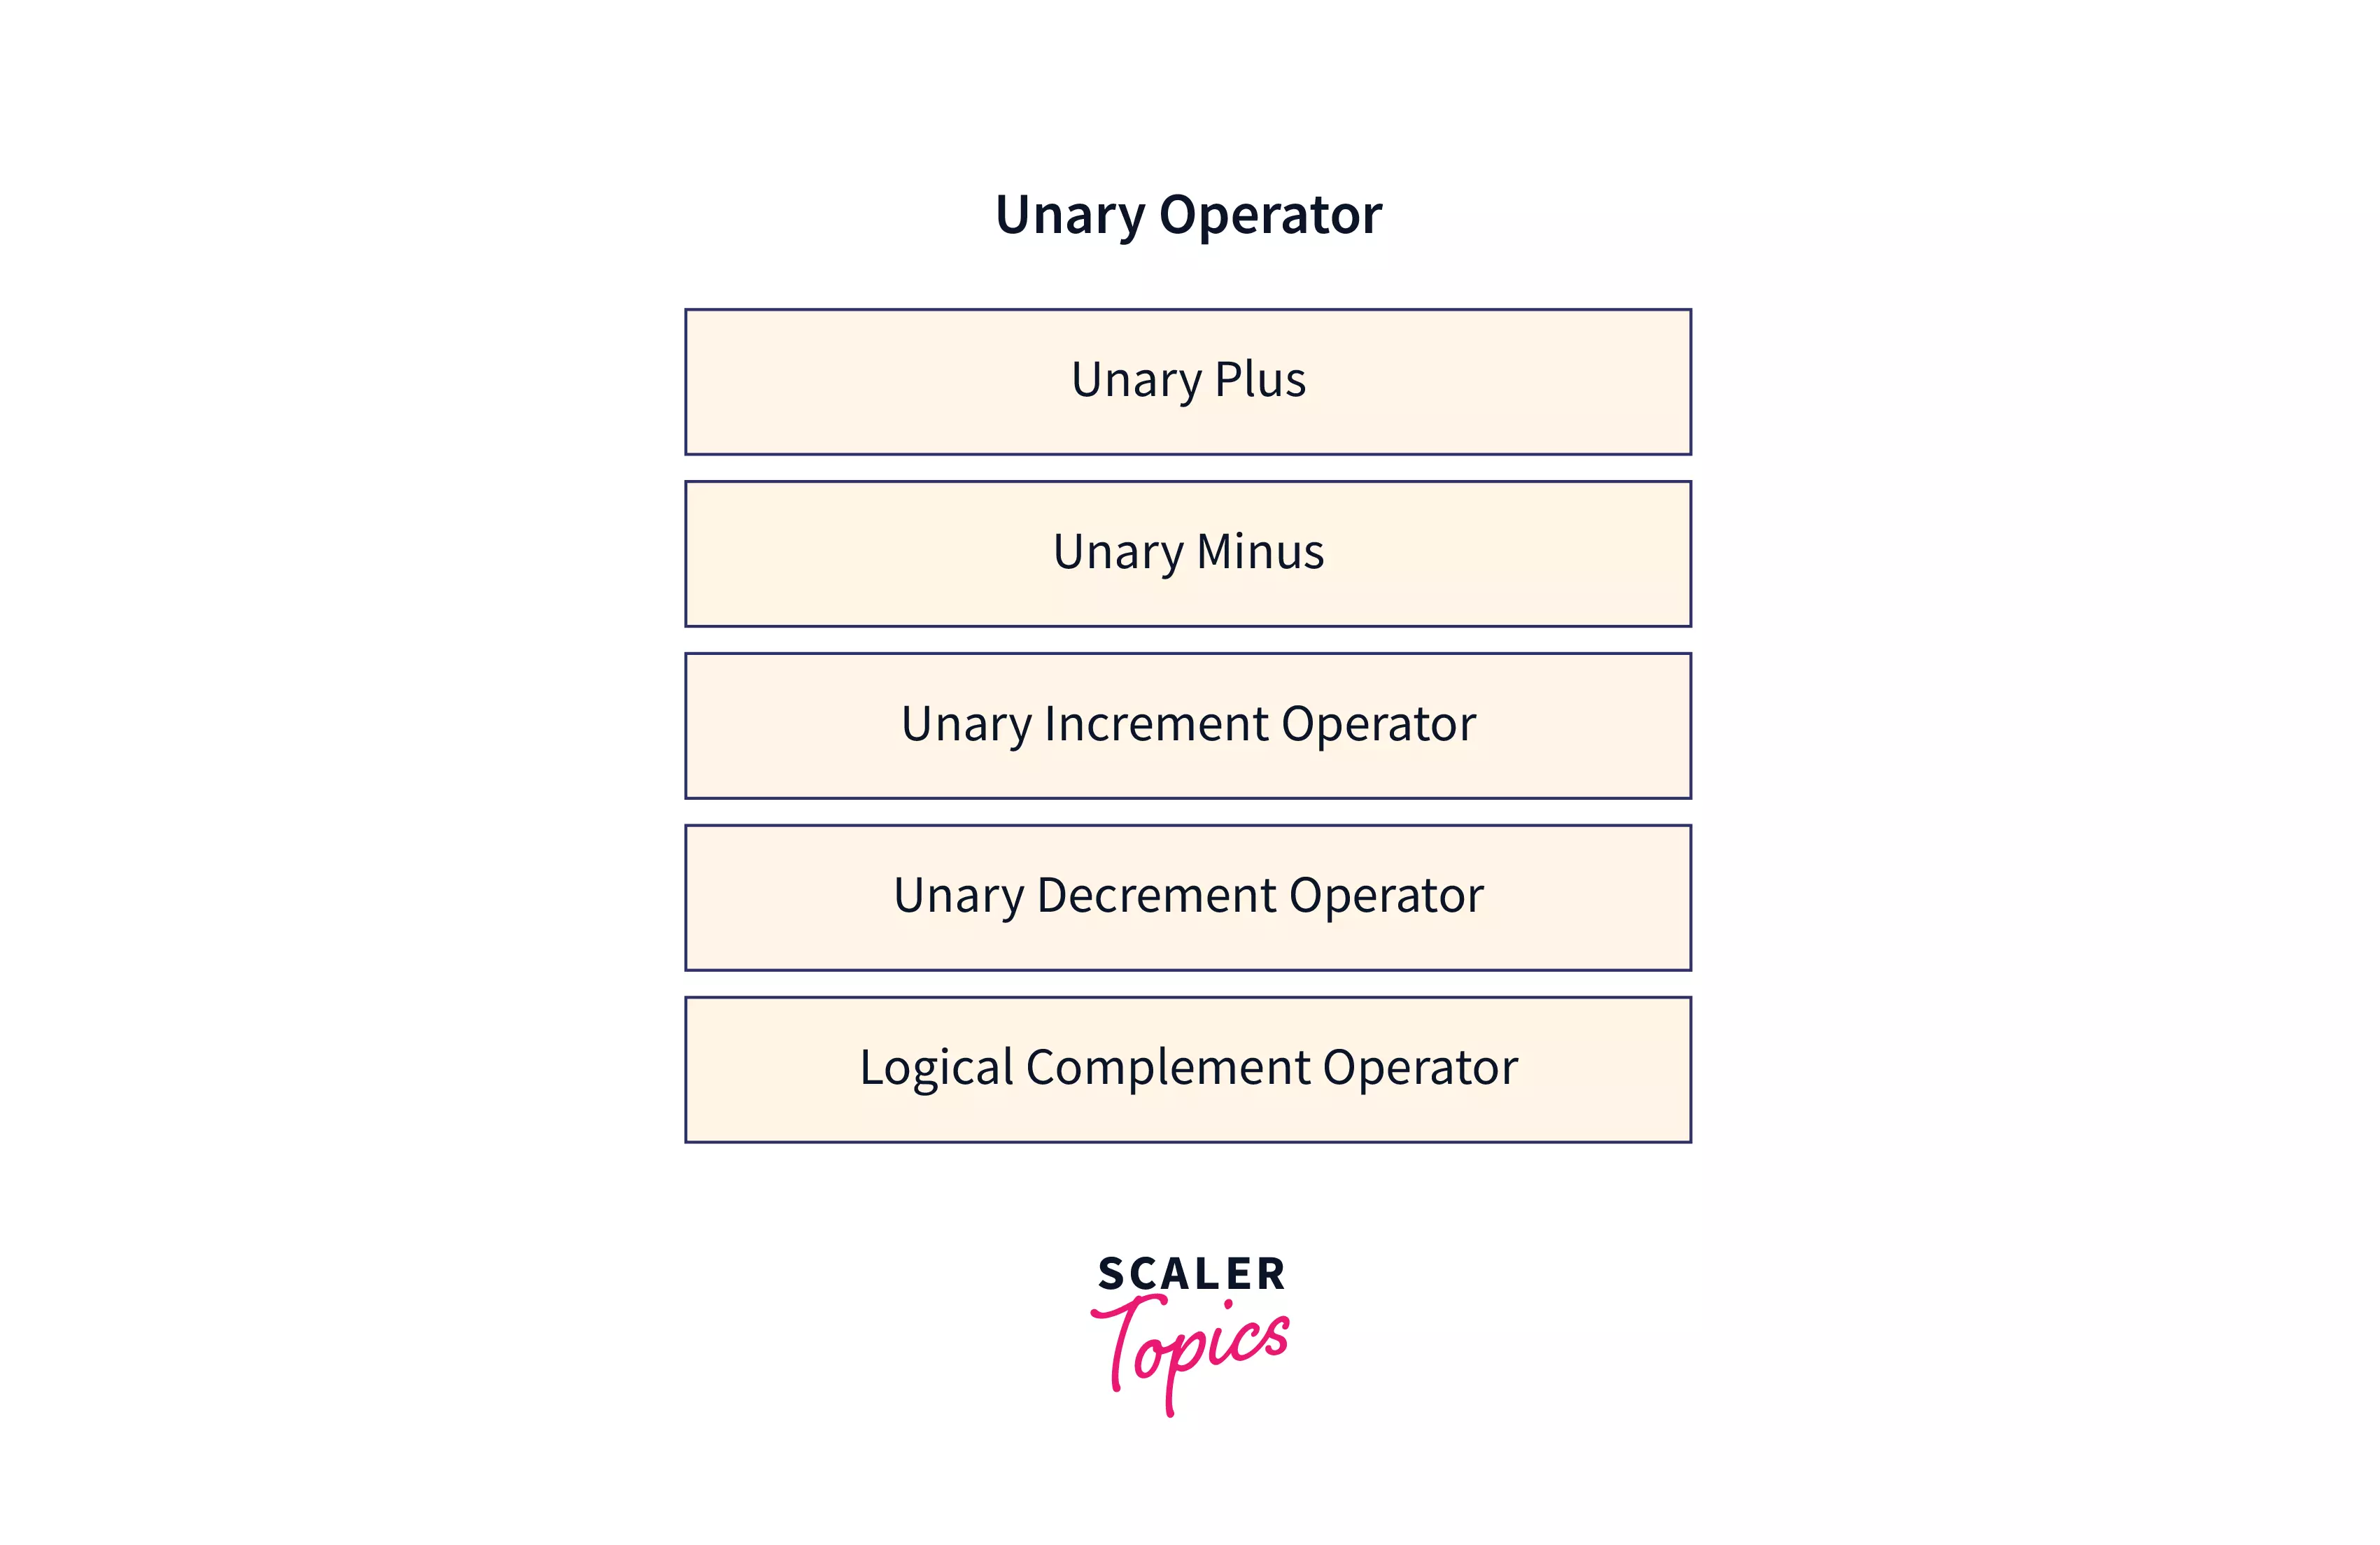 Types of Unary operator